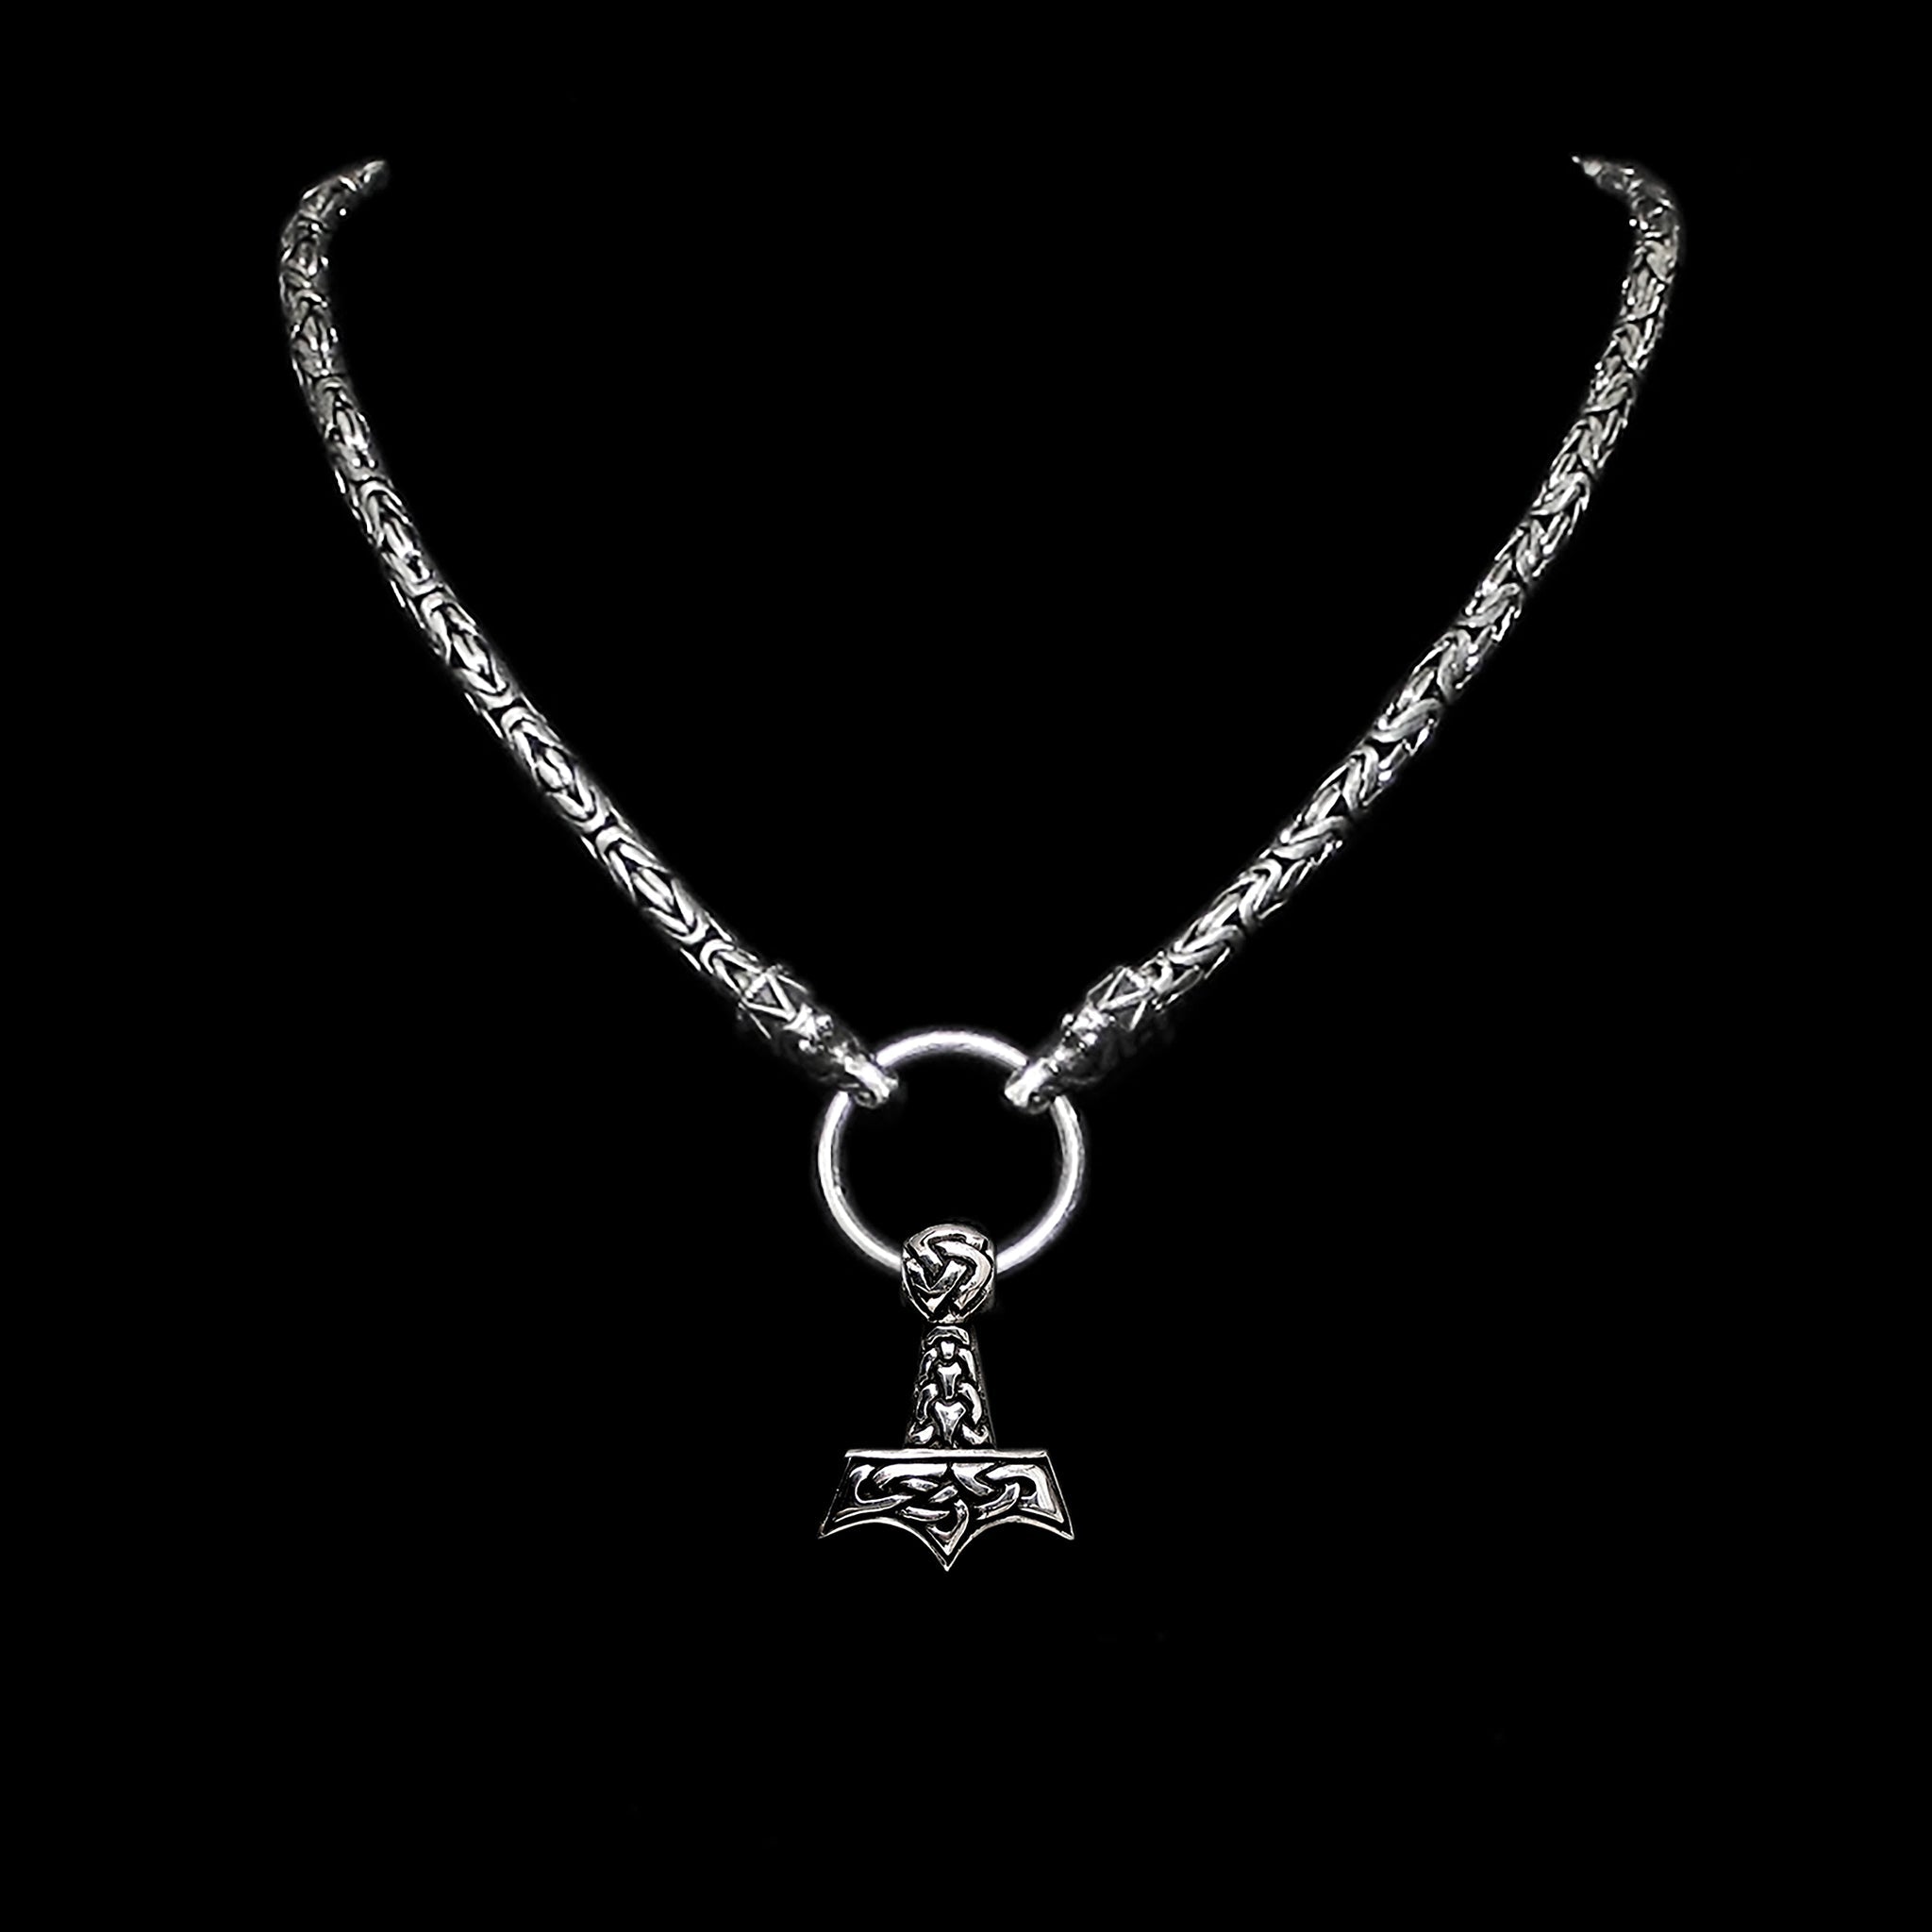 5mm Thick Silver King Chain Thors Hammer Necklace - Gotland Dragon Heads - Knotwork Thors Hammer